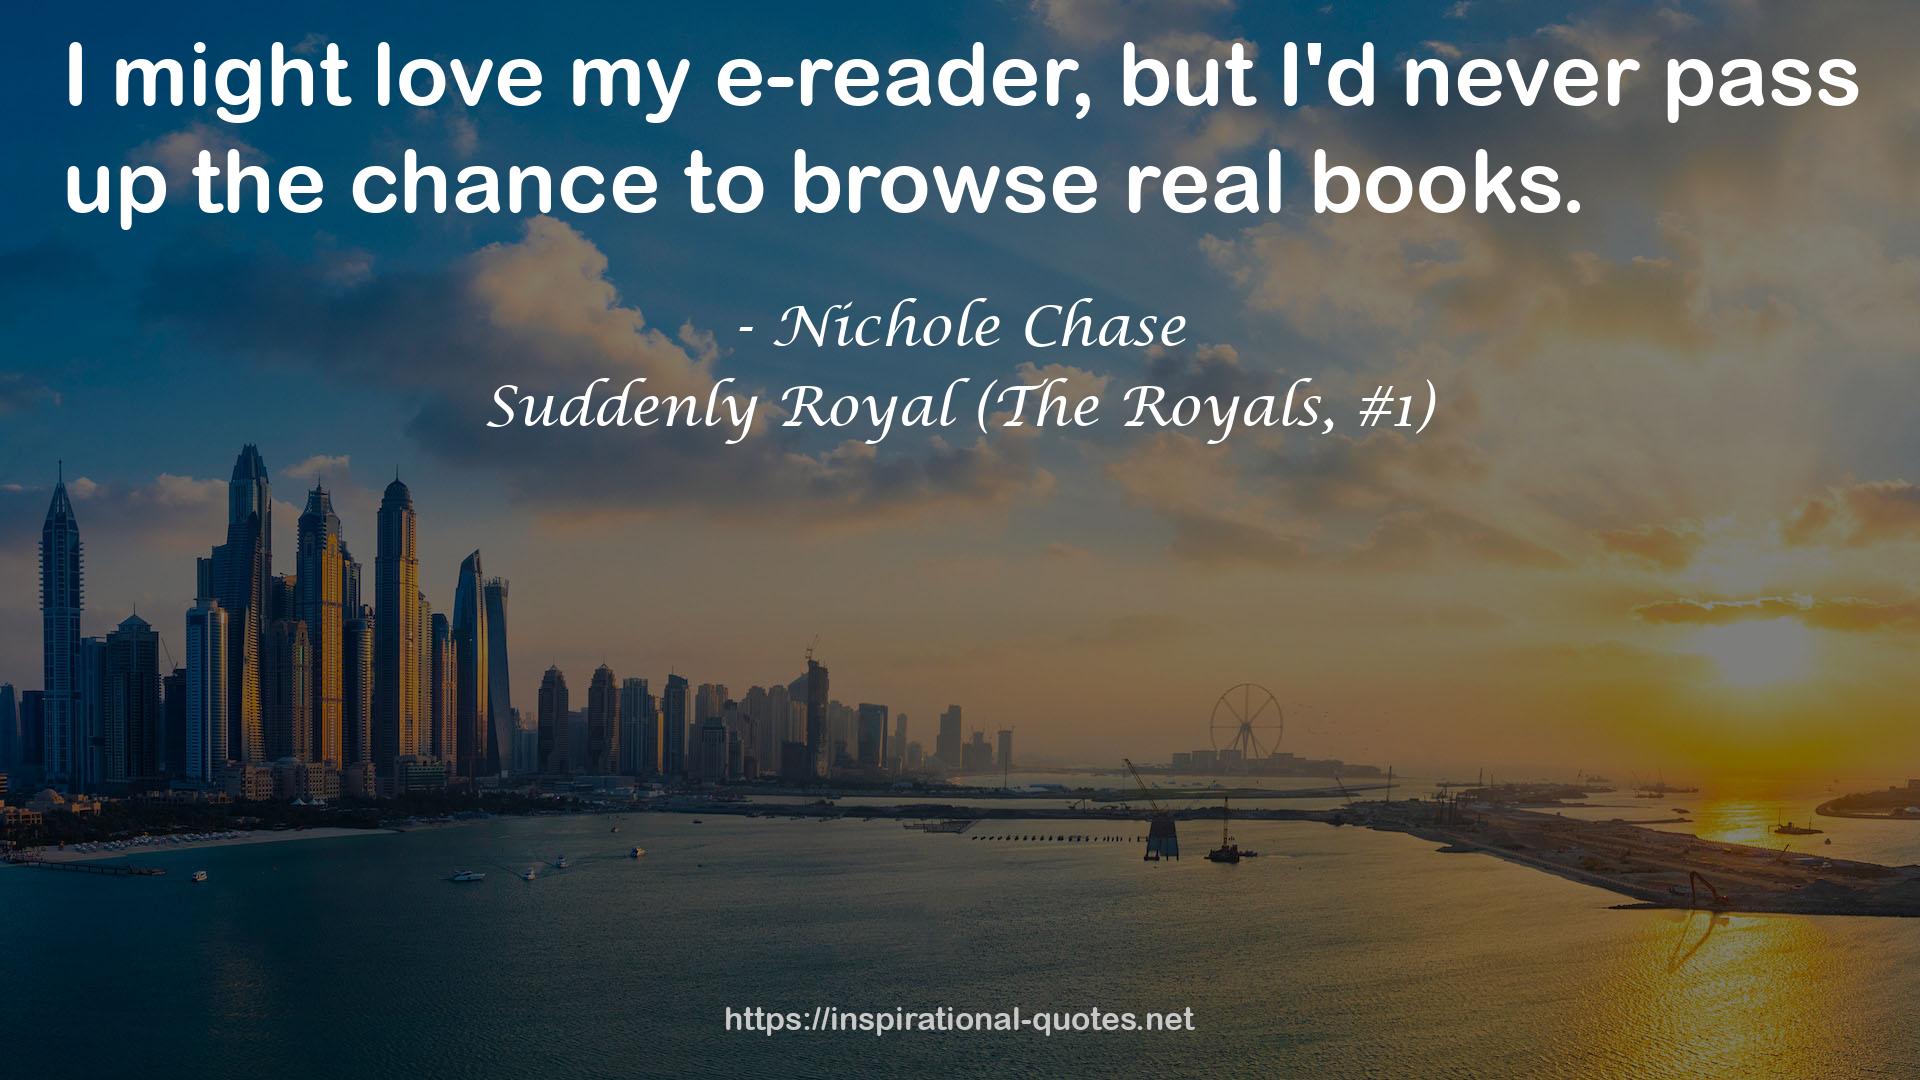 Suddenly Royal (The Royals, #1) QUOTES